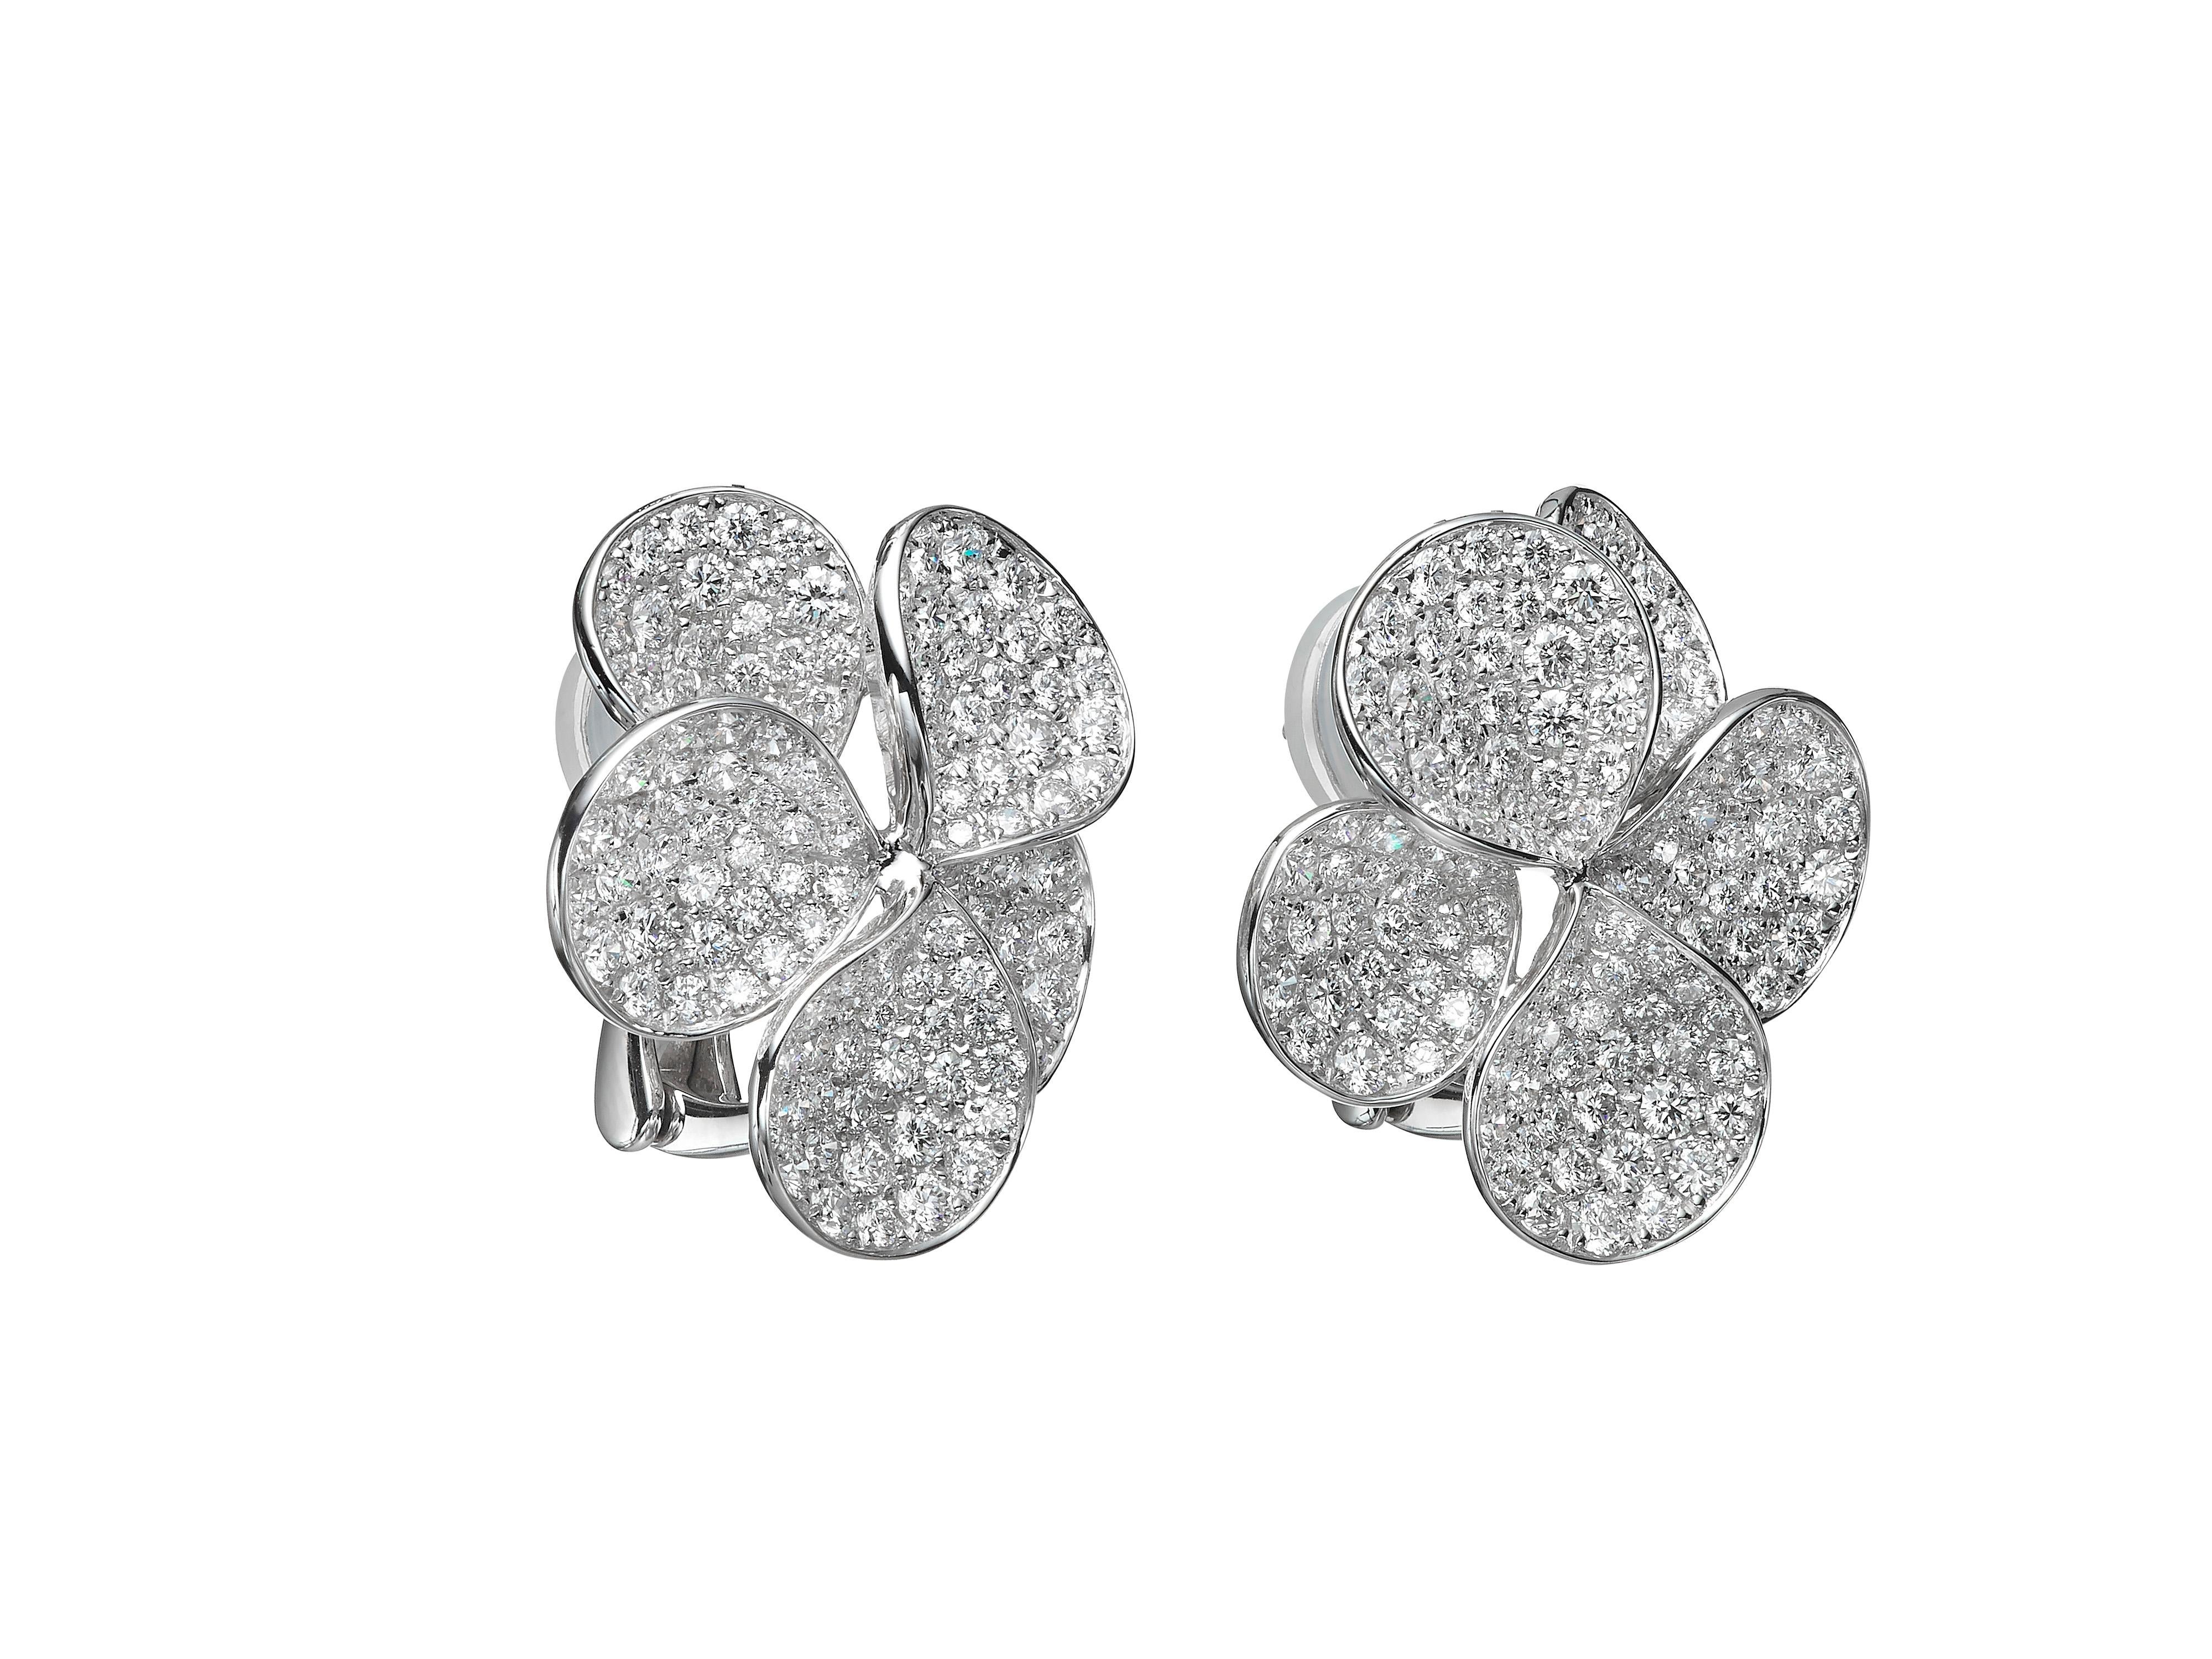 3.91 carats of pavé white diamonds form petal shaped stud earrings.  Set in 18K white gold.

Composition: 
18K White Gold
288 Round Diamonds: 3.91 carats 
Diamond Quality: VS, G/H 

About Butani: 
Family-run high jewellery house Butani combines the